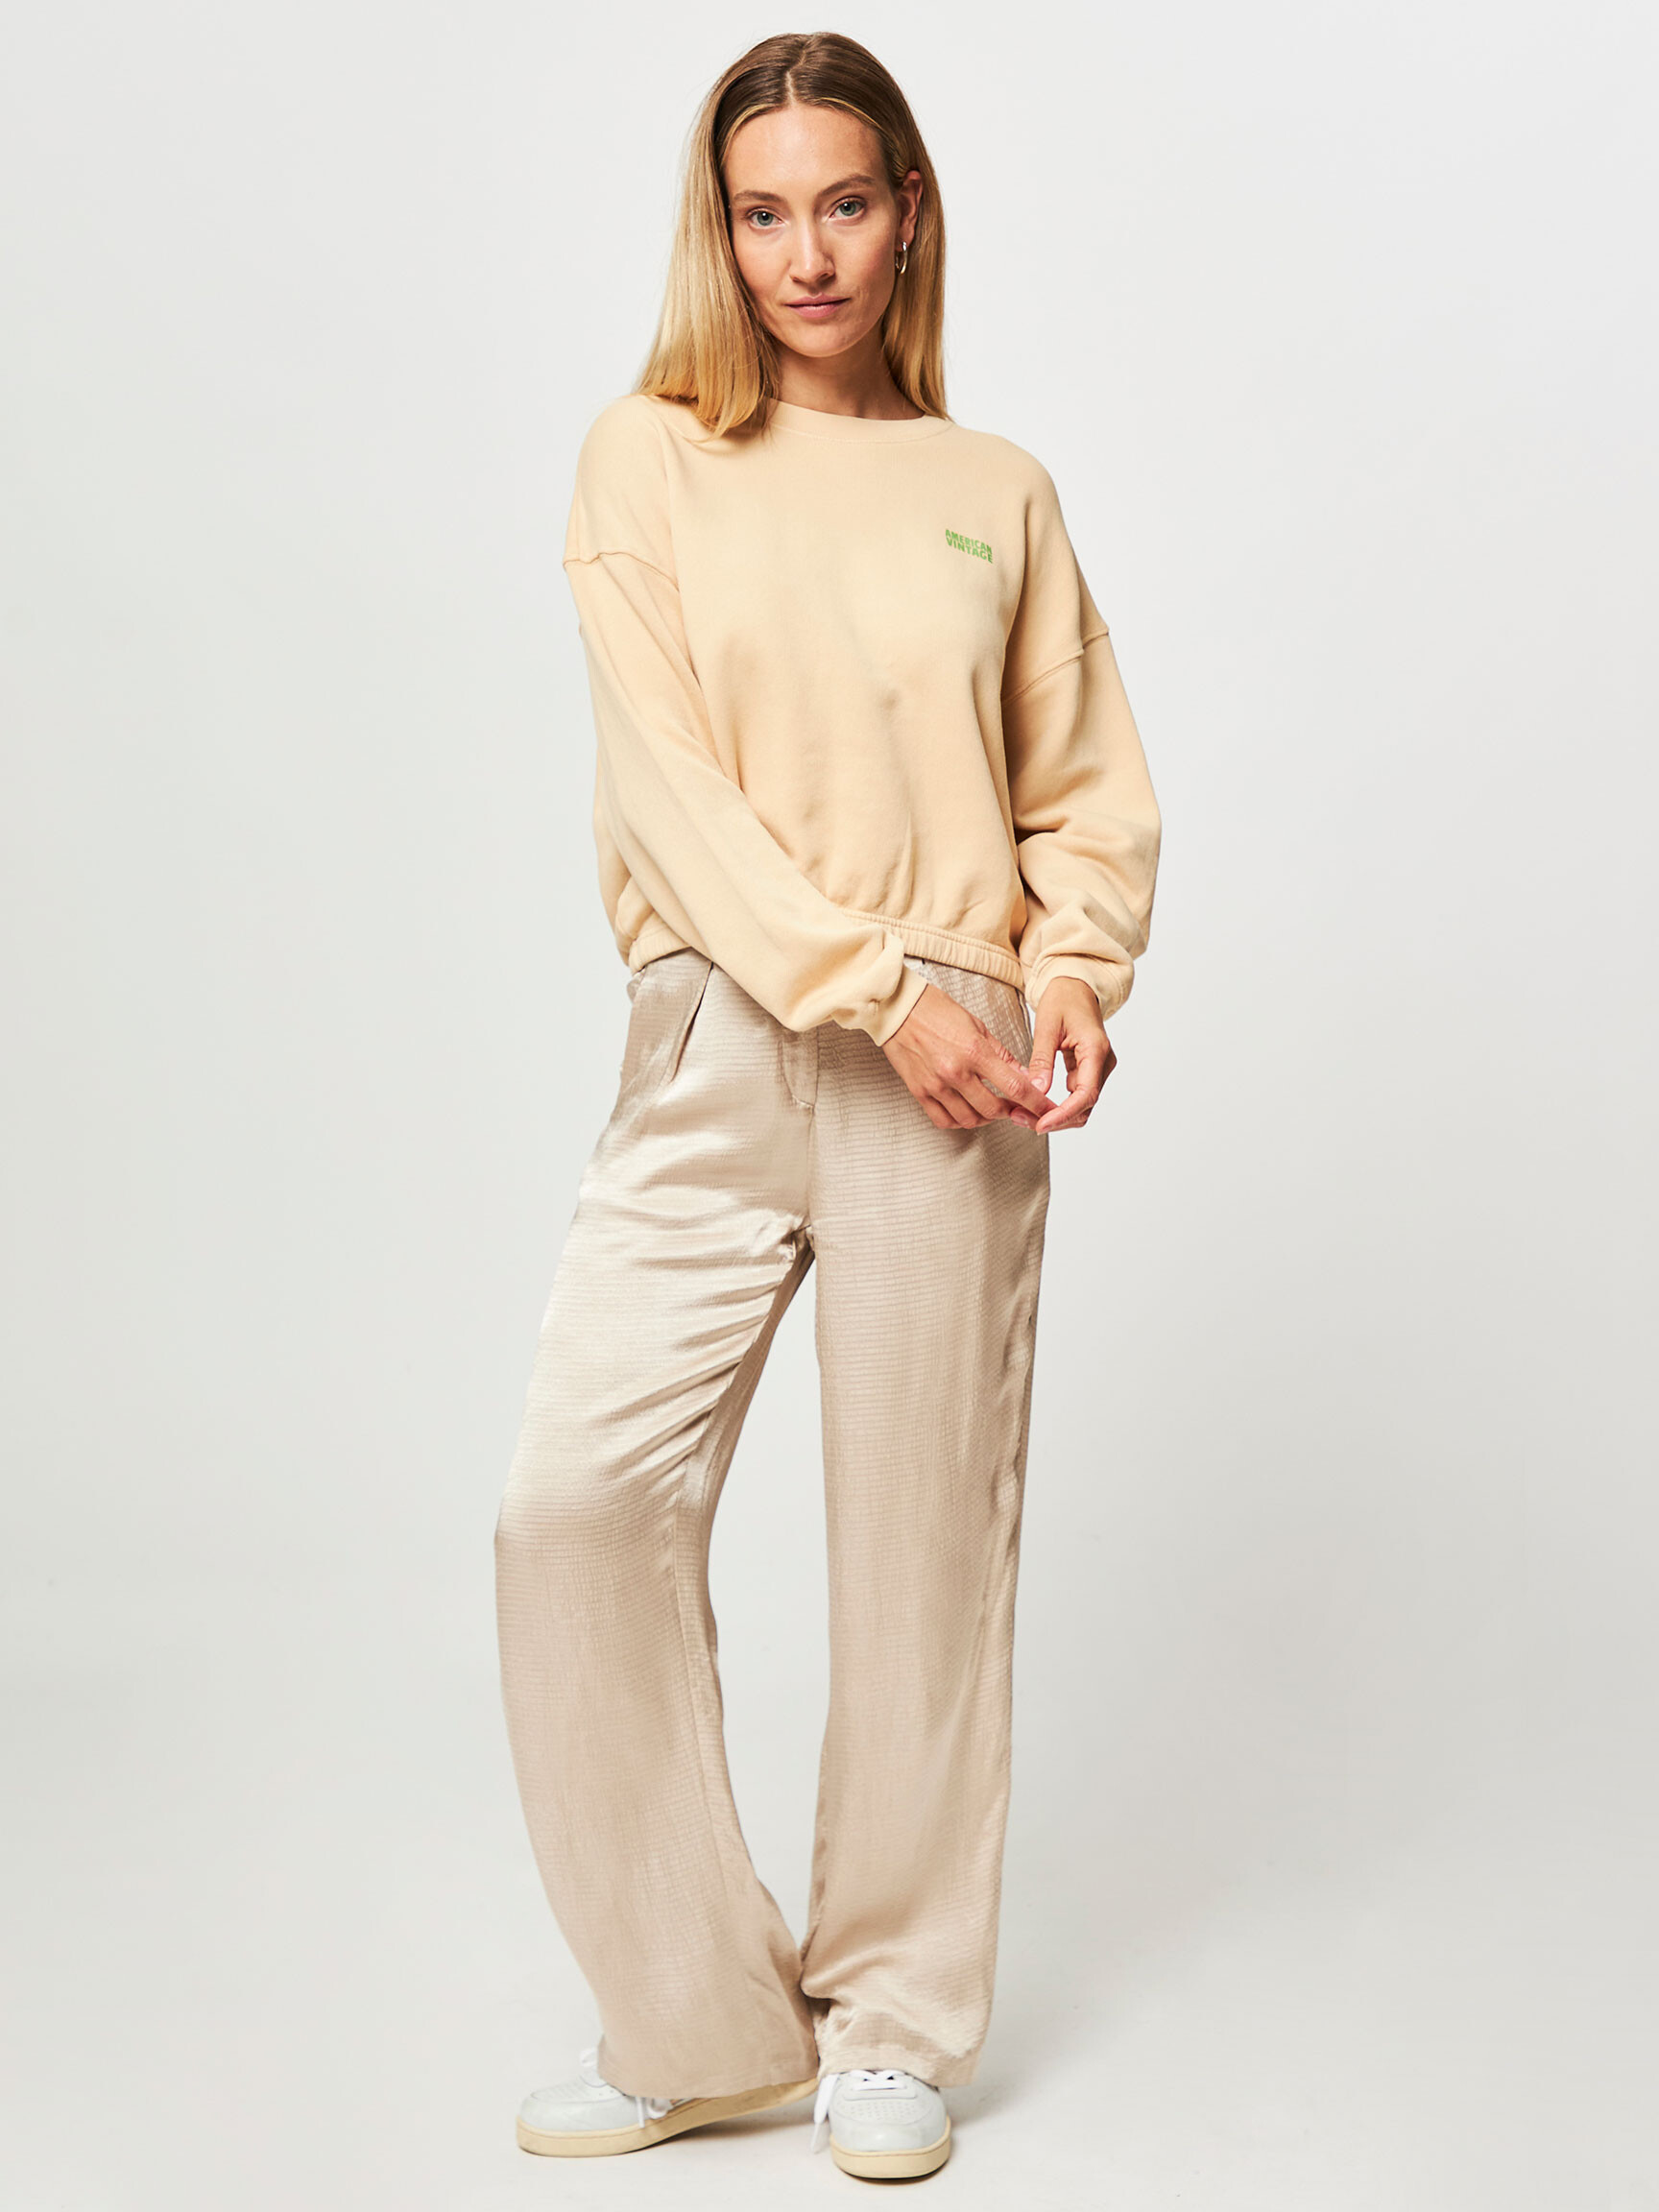 Cargo trousers e.s.vintage, ladies' pewter | Strauss